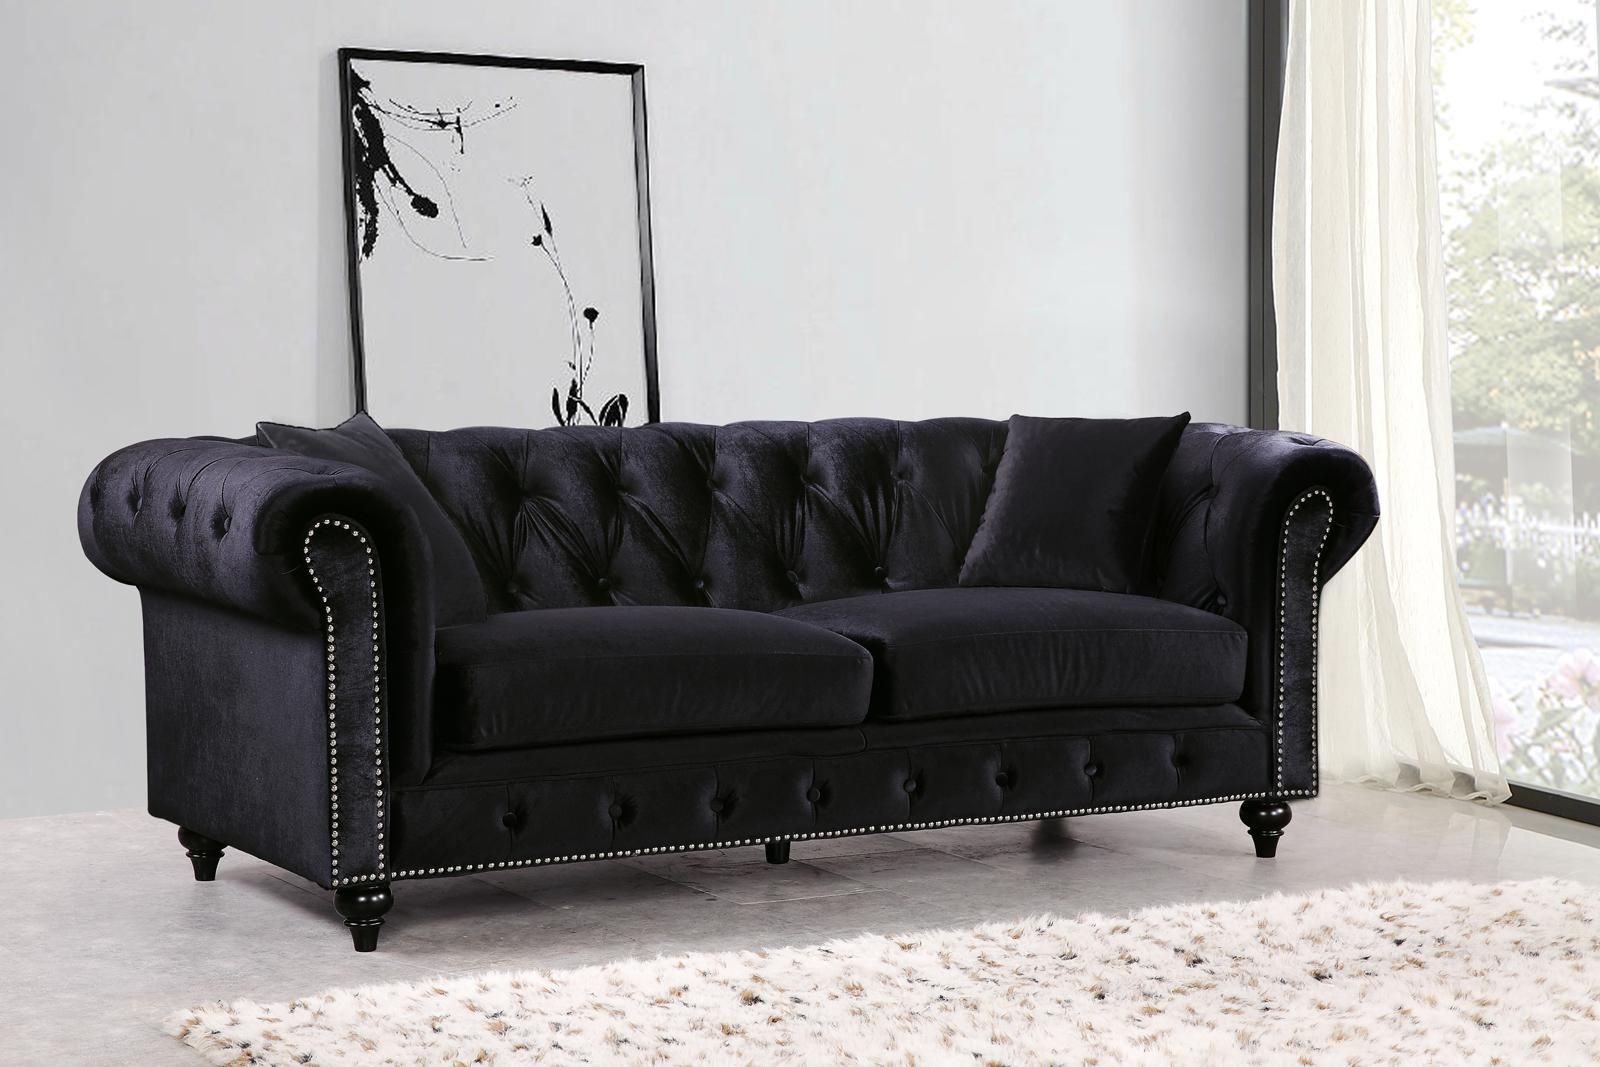 Meridian Chesterfield Velvet Sofa In Black 662bl S With Chesterfield Black Sofas (View 11 of 20)